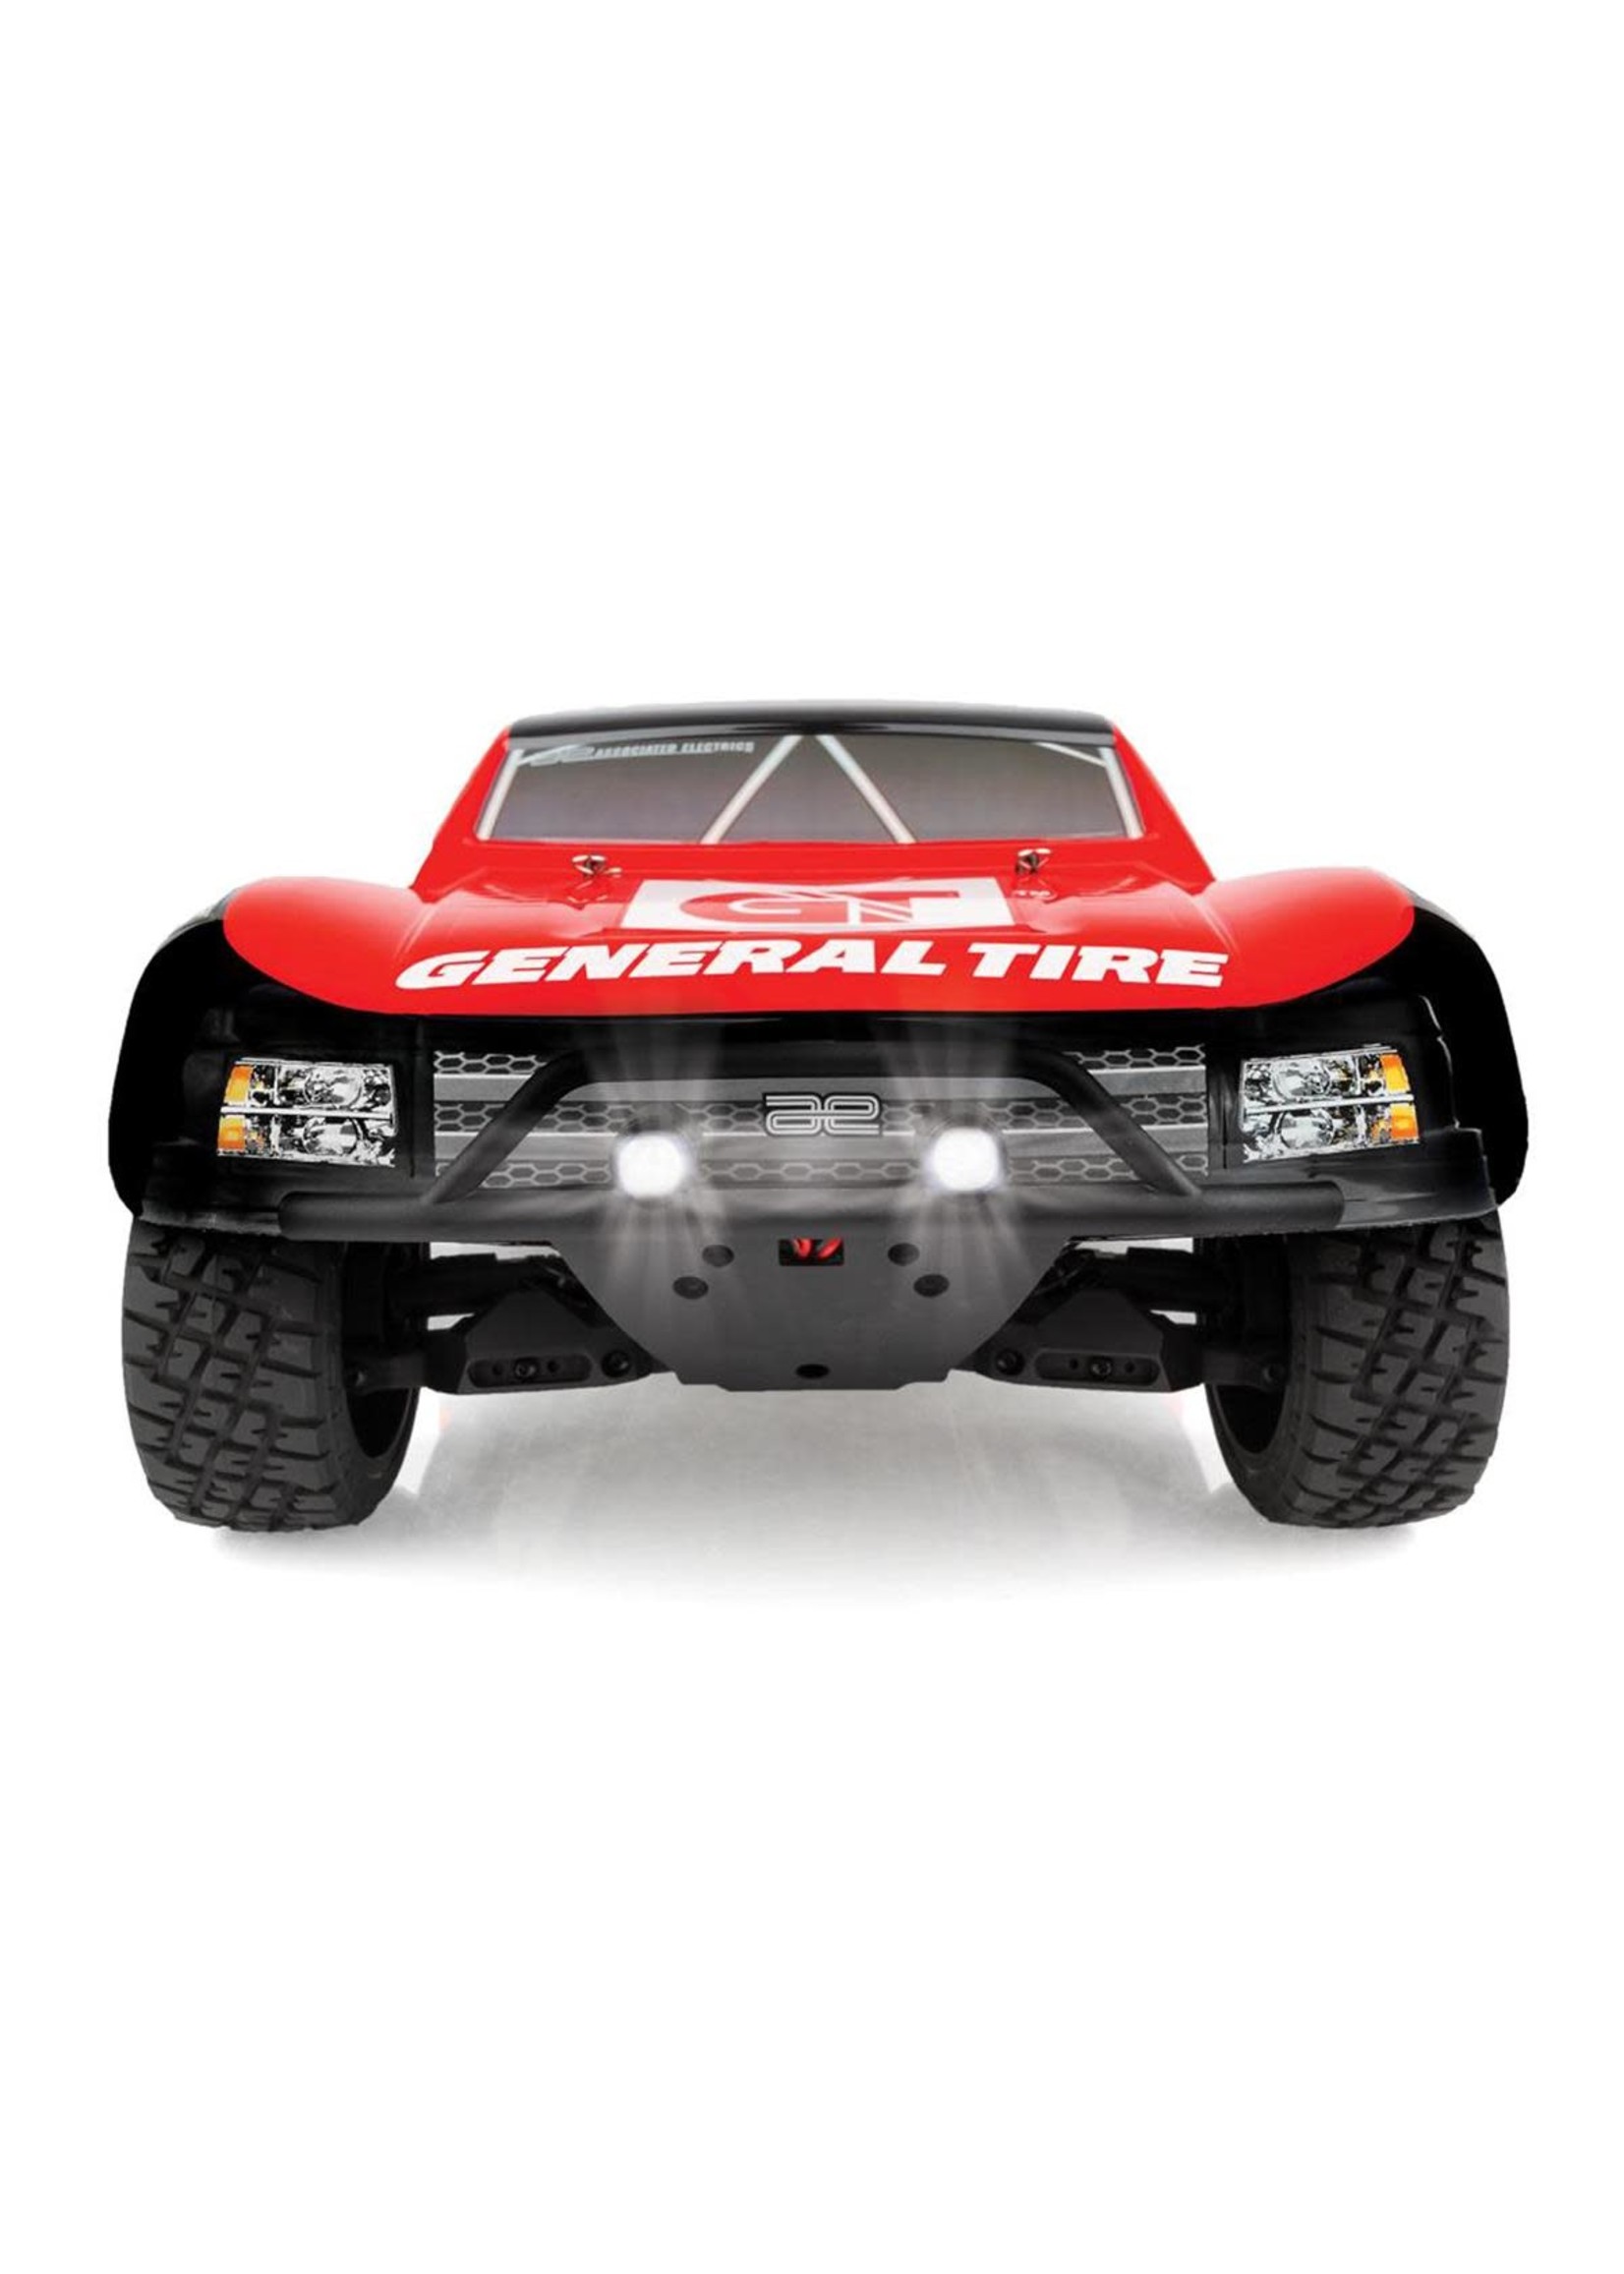 Team Associated ASC20531 Team Associated Pro4 SC10 1/10 RTR 4WD Brushless Short Course Truck w/2.4GHz Radio (General Tire)